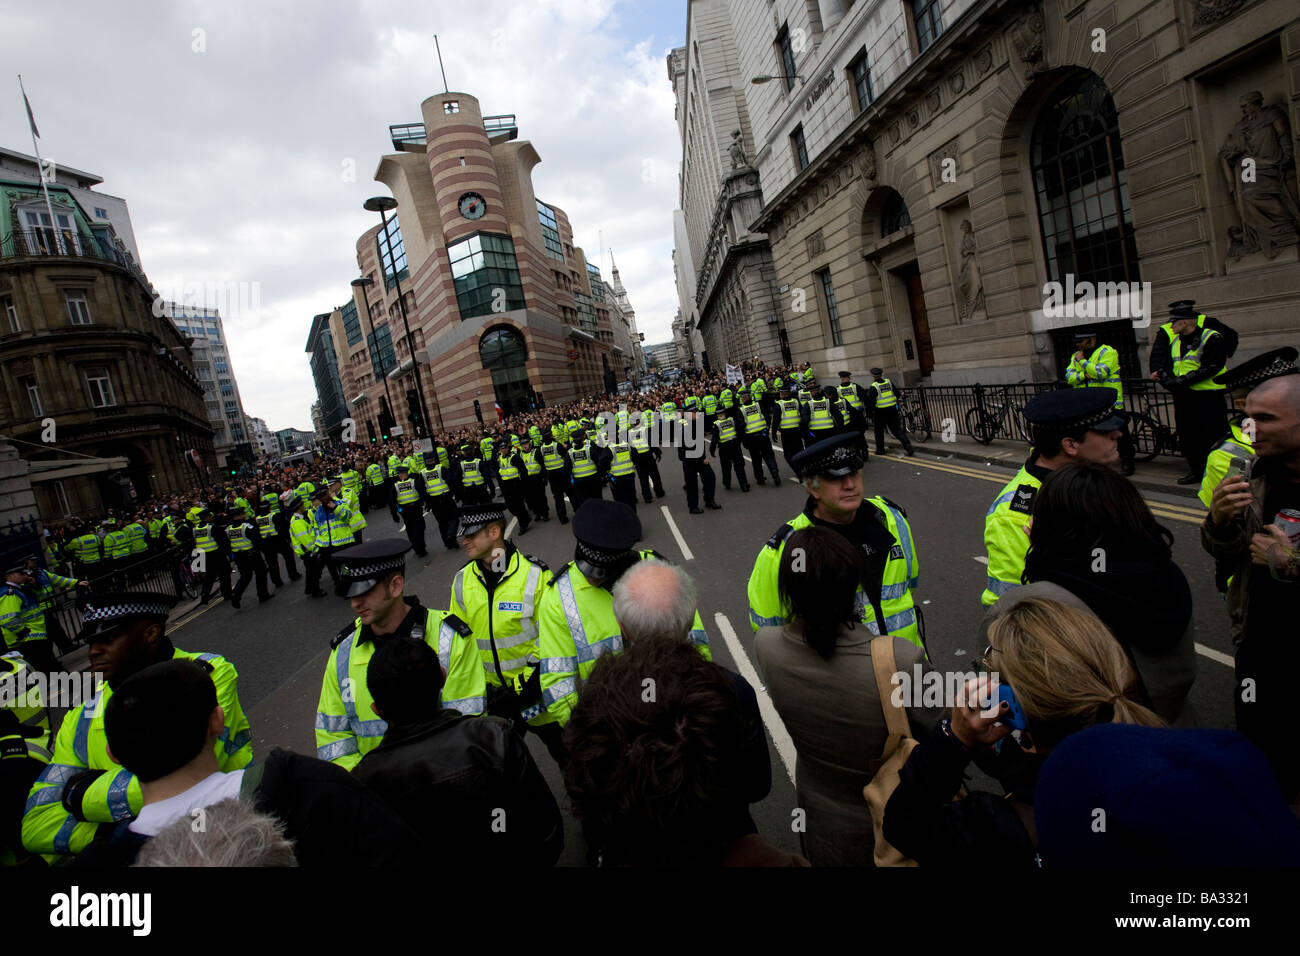 Police in formation described as the 'kettle' during G20 protests at Bank of England, London Stock Photo